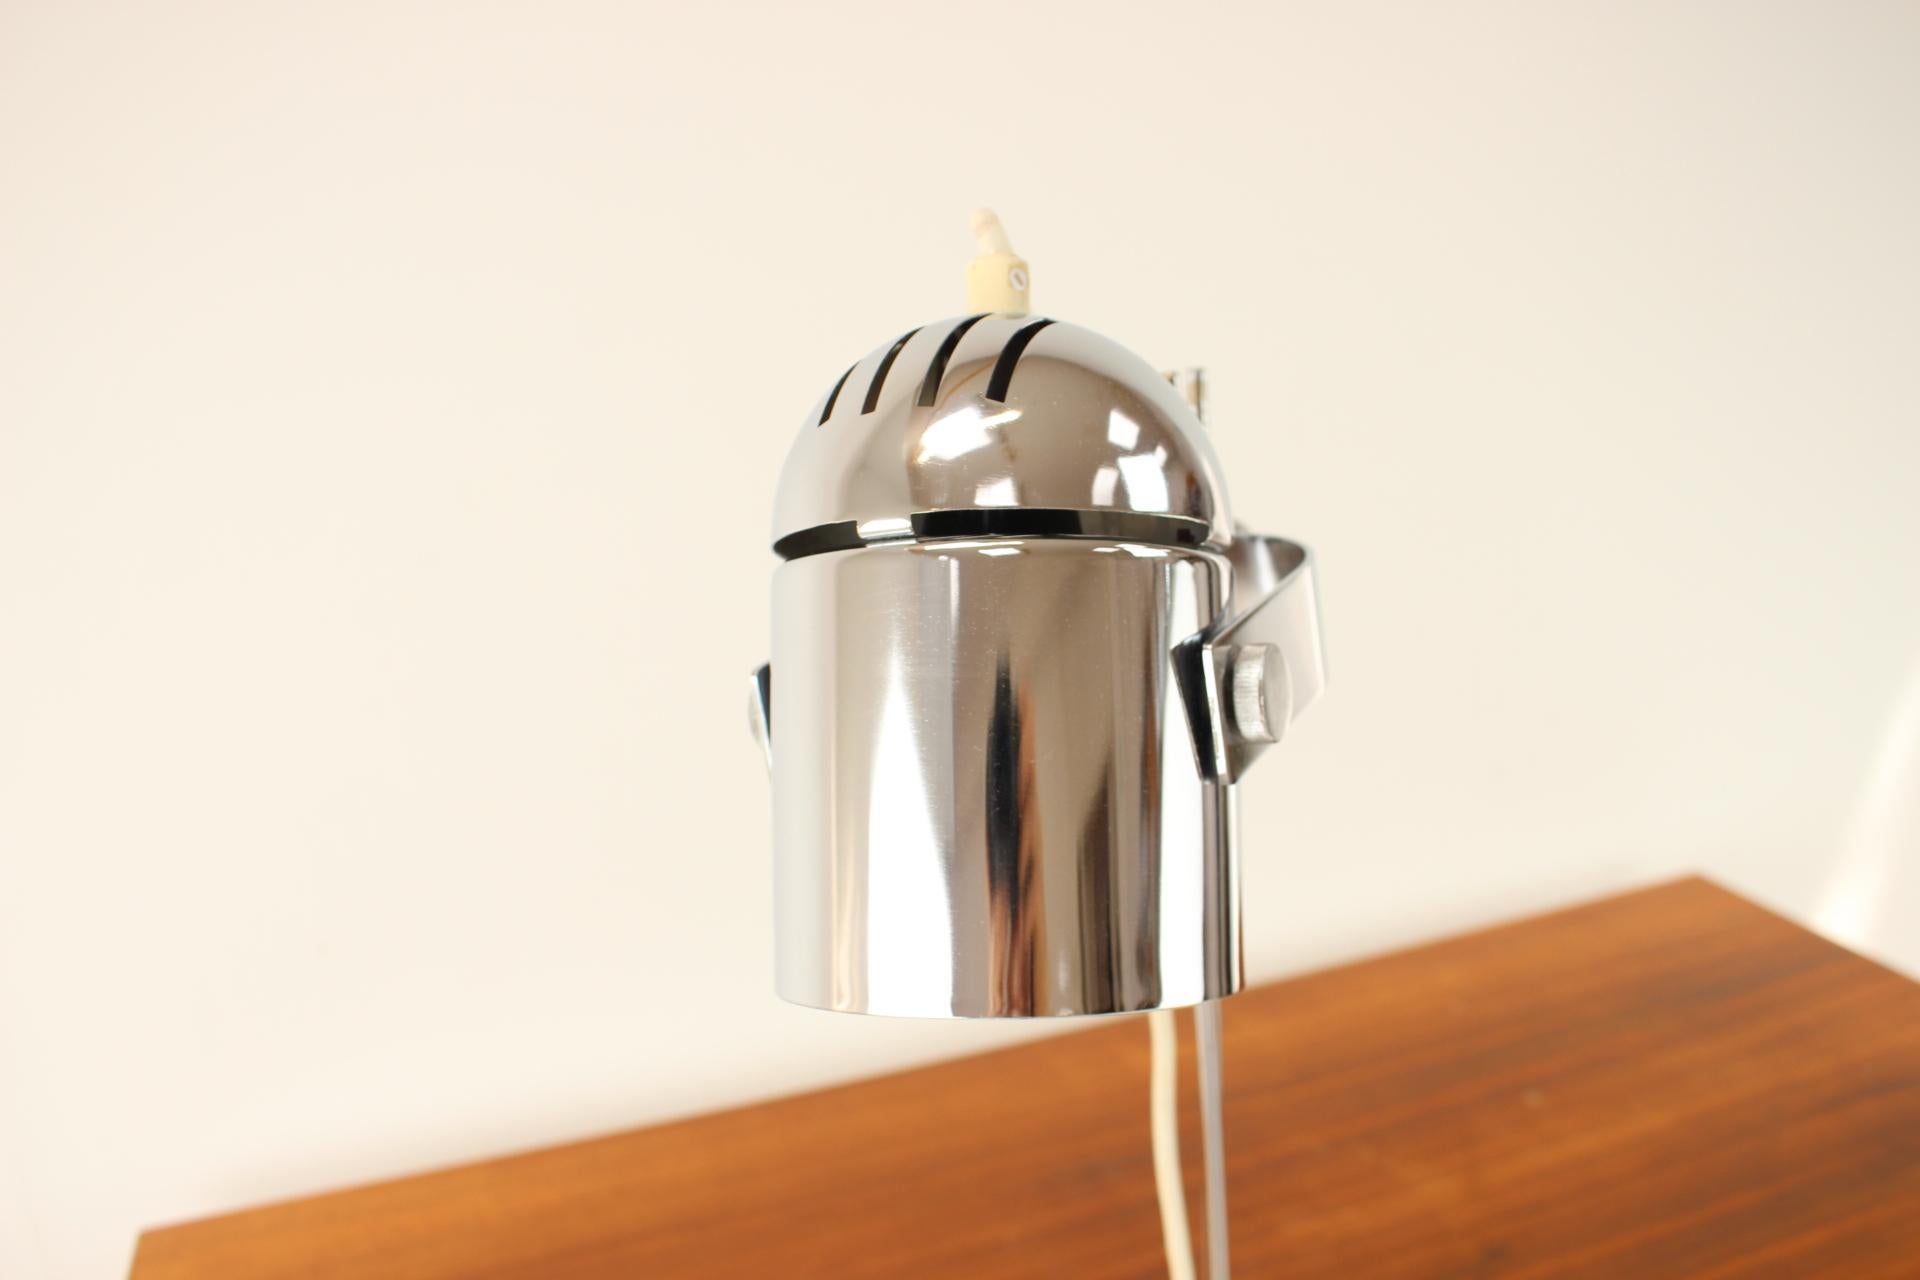 Czech Mid-Century Adjustable Table Lamp Designed by Stanislav Indra, 1970's For Sale